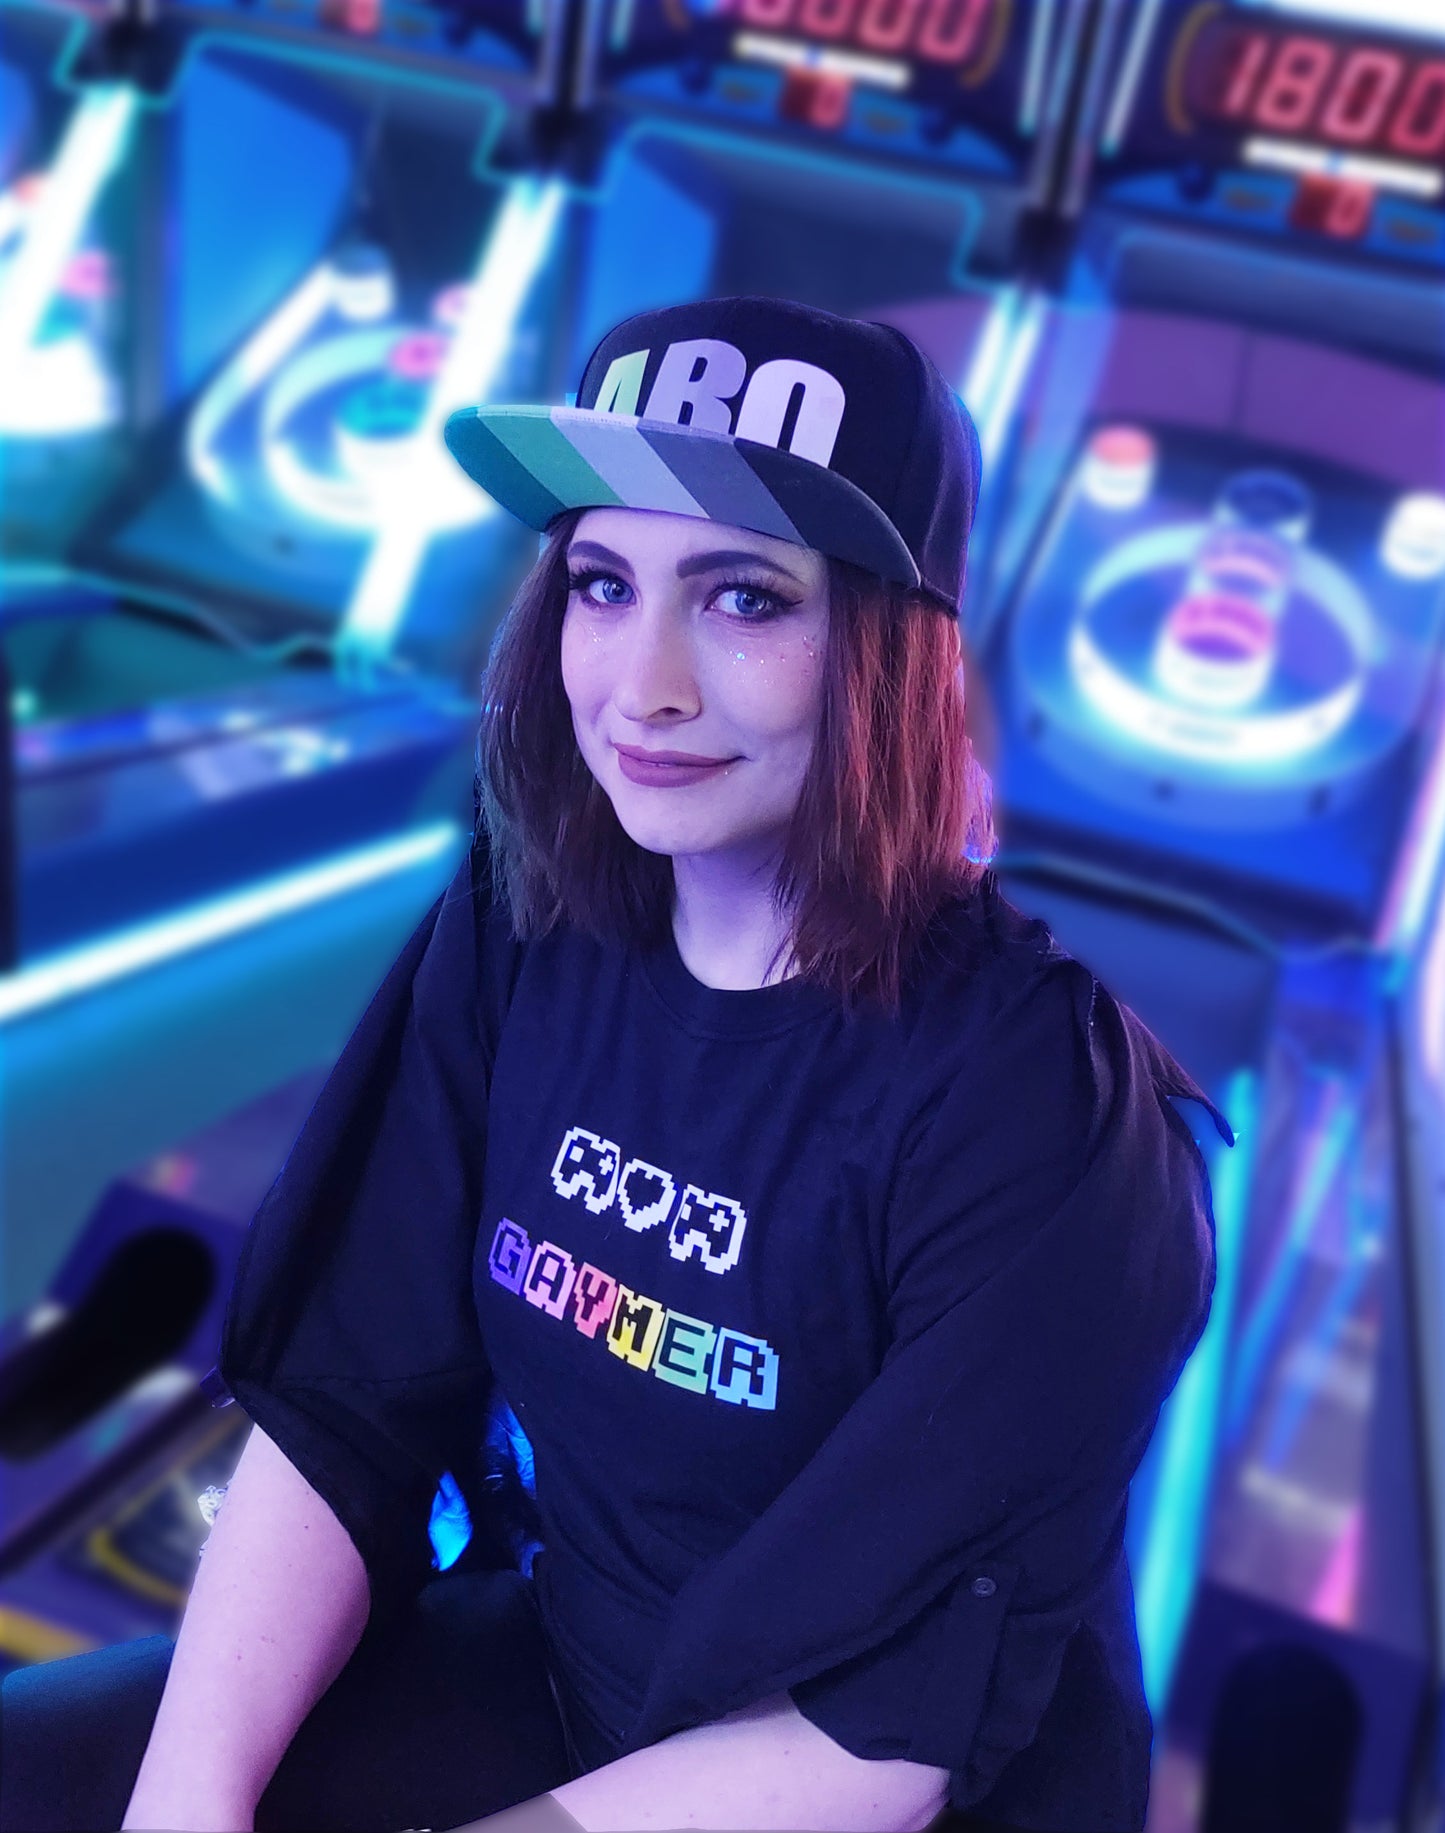 A model wears the aromantic pride hat. They are sitting on a skeeball machine and wearing a black “gaymer” t-shirt